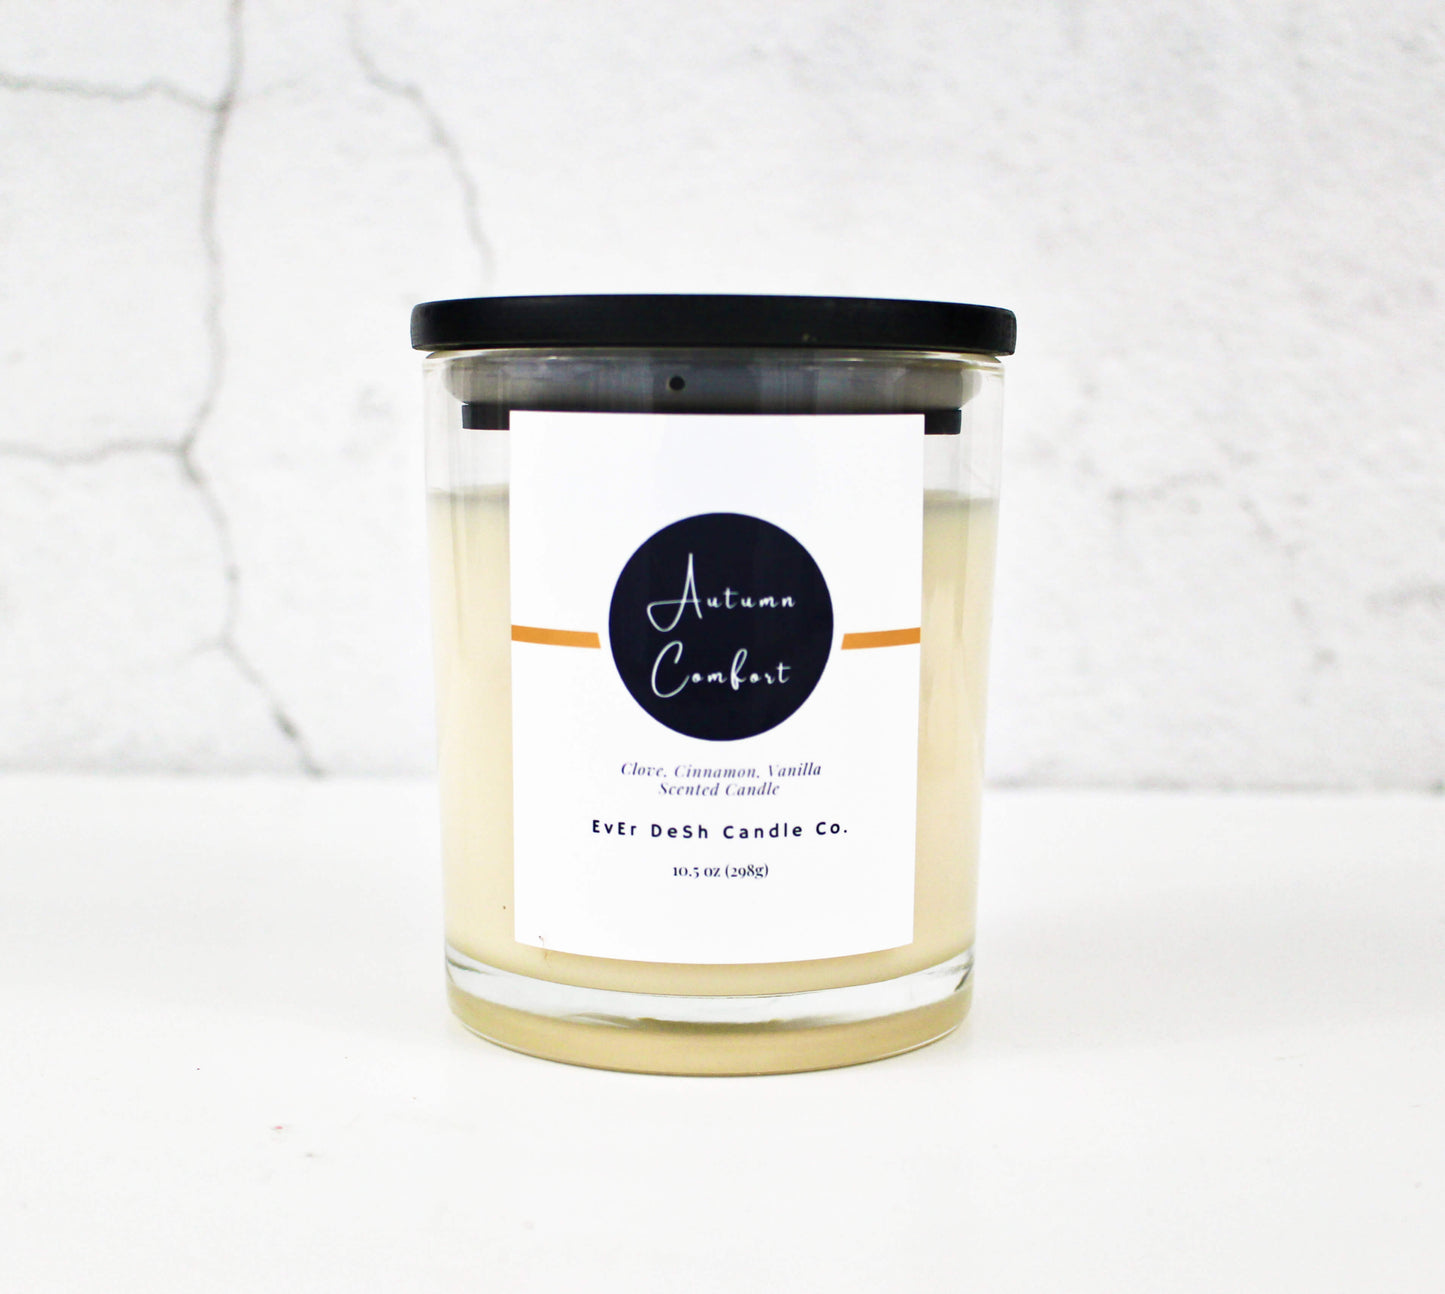 This candle is a  rich spicy blend of cinnamon and clove, balanced with butter cream and sweetened with rich vanilla to tempt the senses with this warm treat of spices that we call Autumn Comfort.  